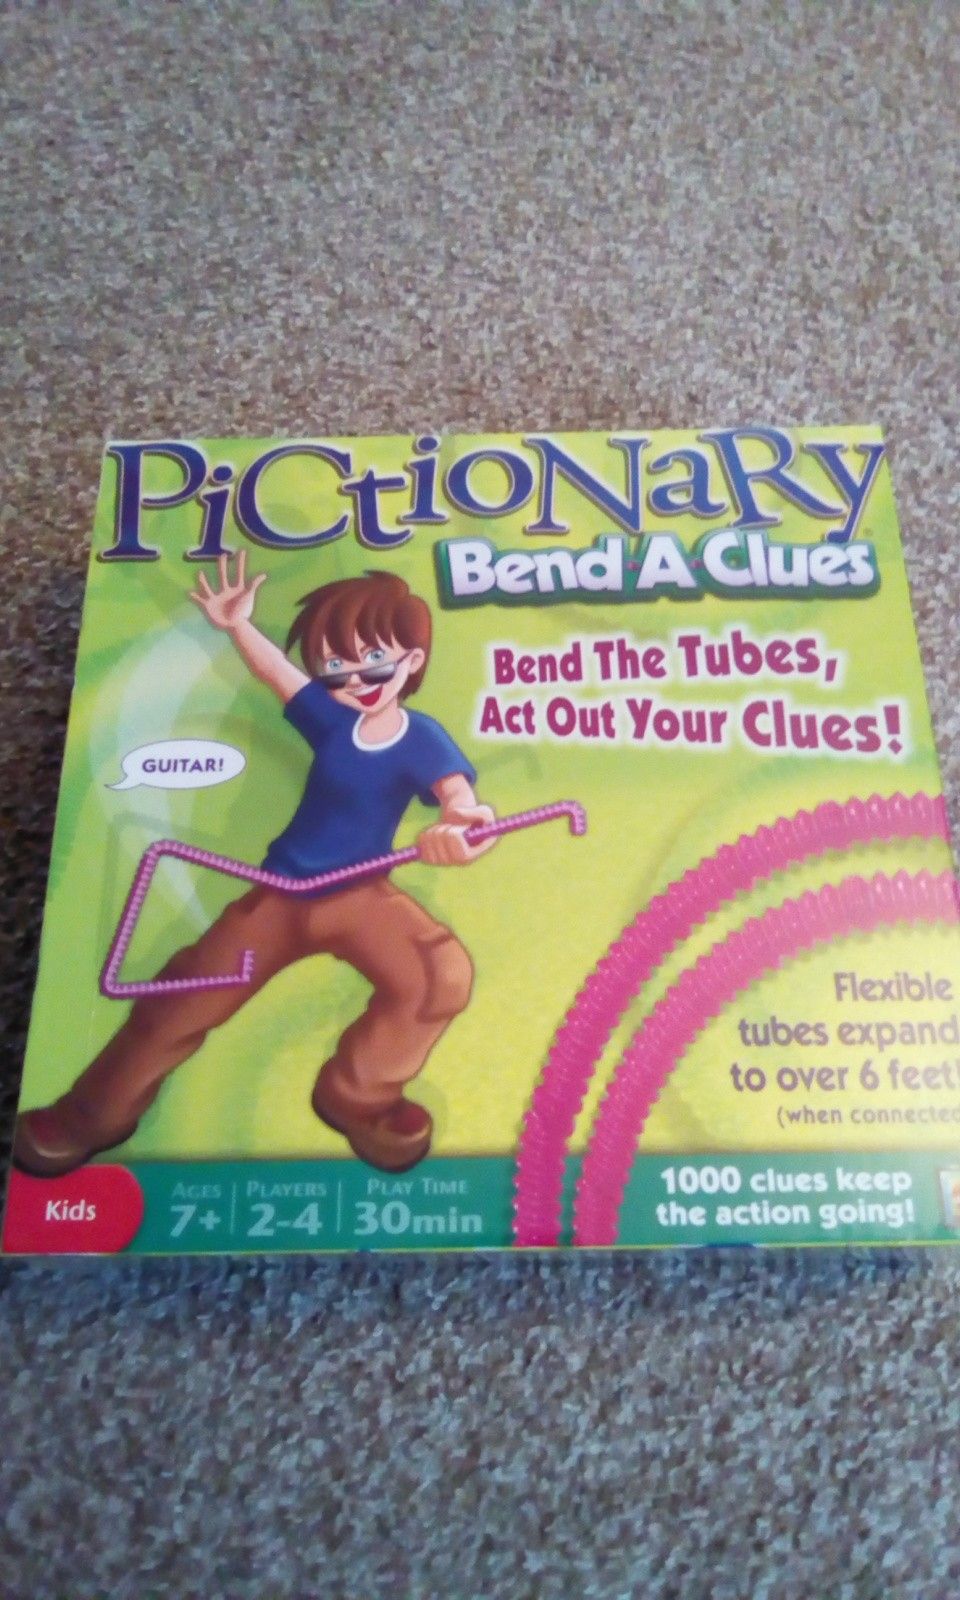 Pictionary Bend-a-Clues Brand new